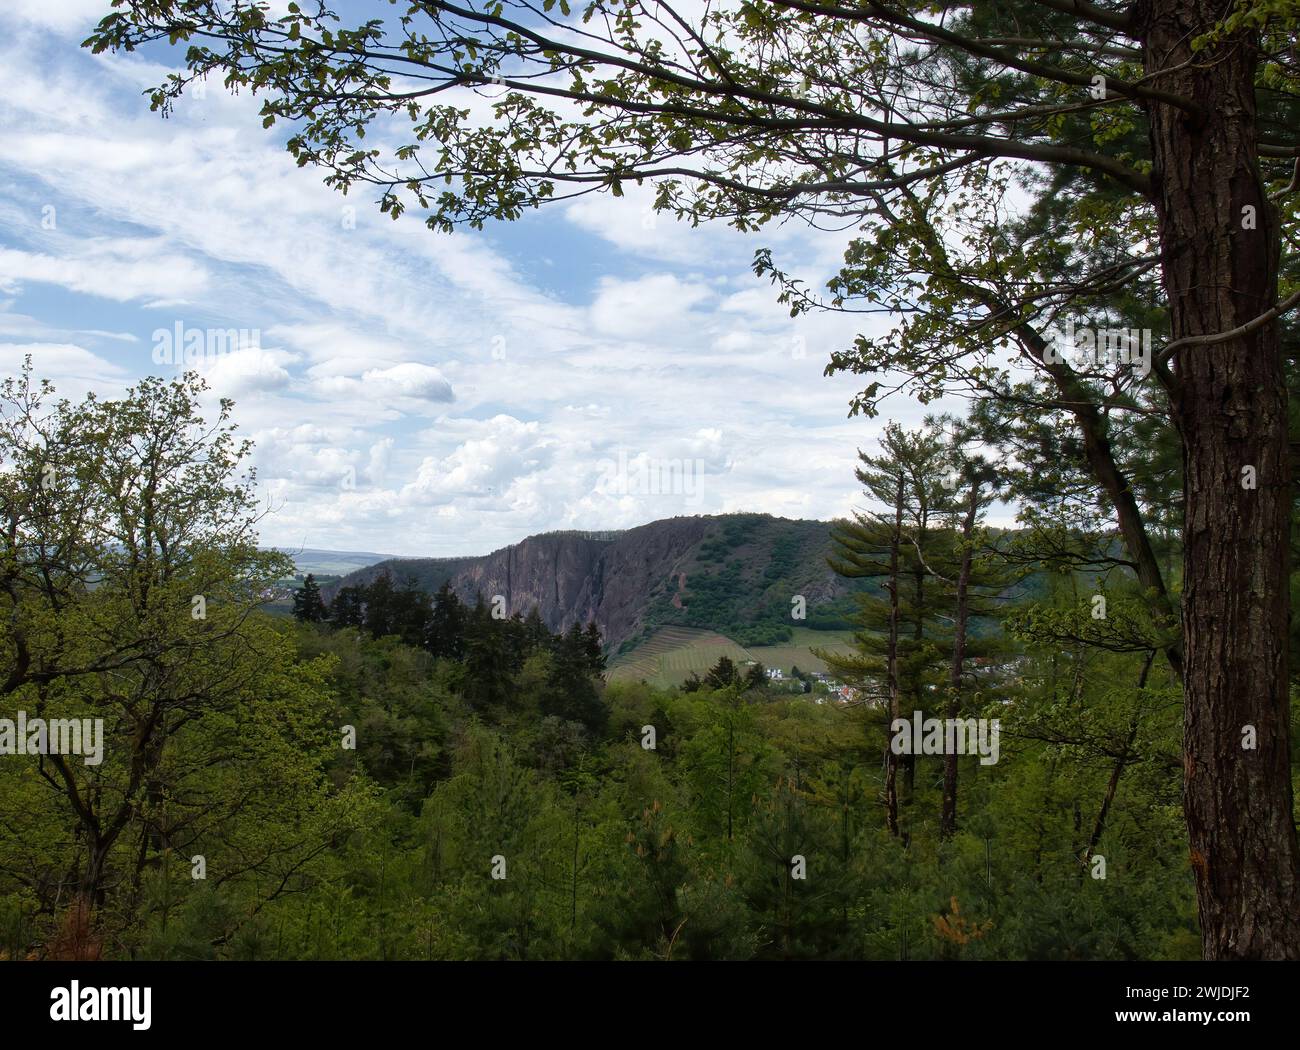 Green trees with Rotenfels in the background on a spring day in Rhineland Palatinate, Germany. Stock Photo